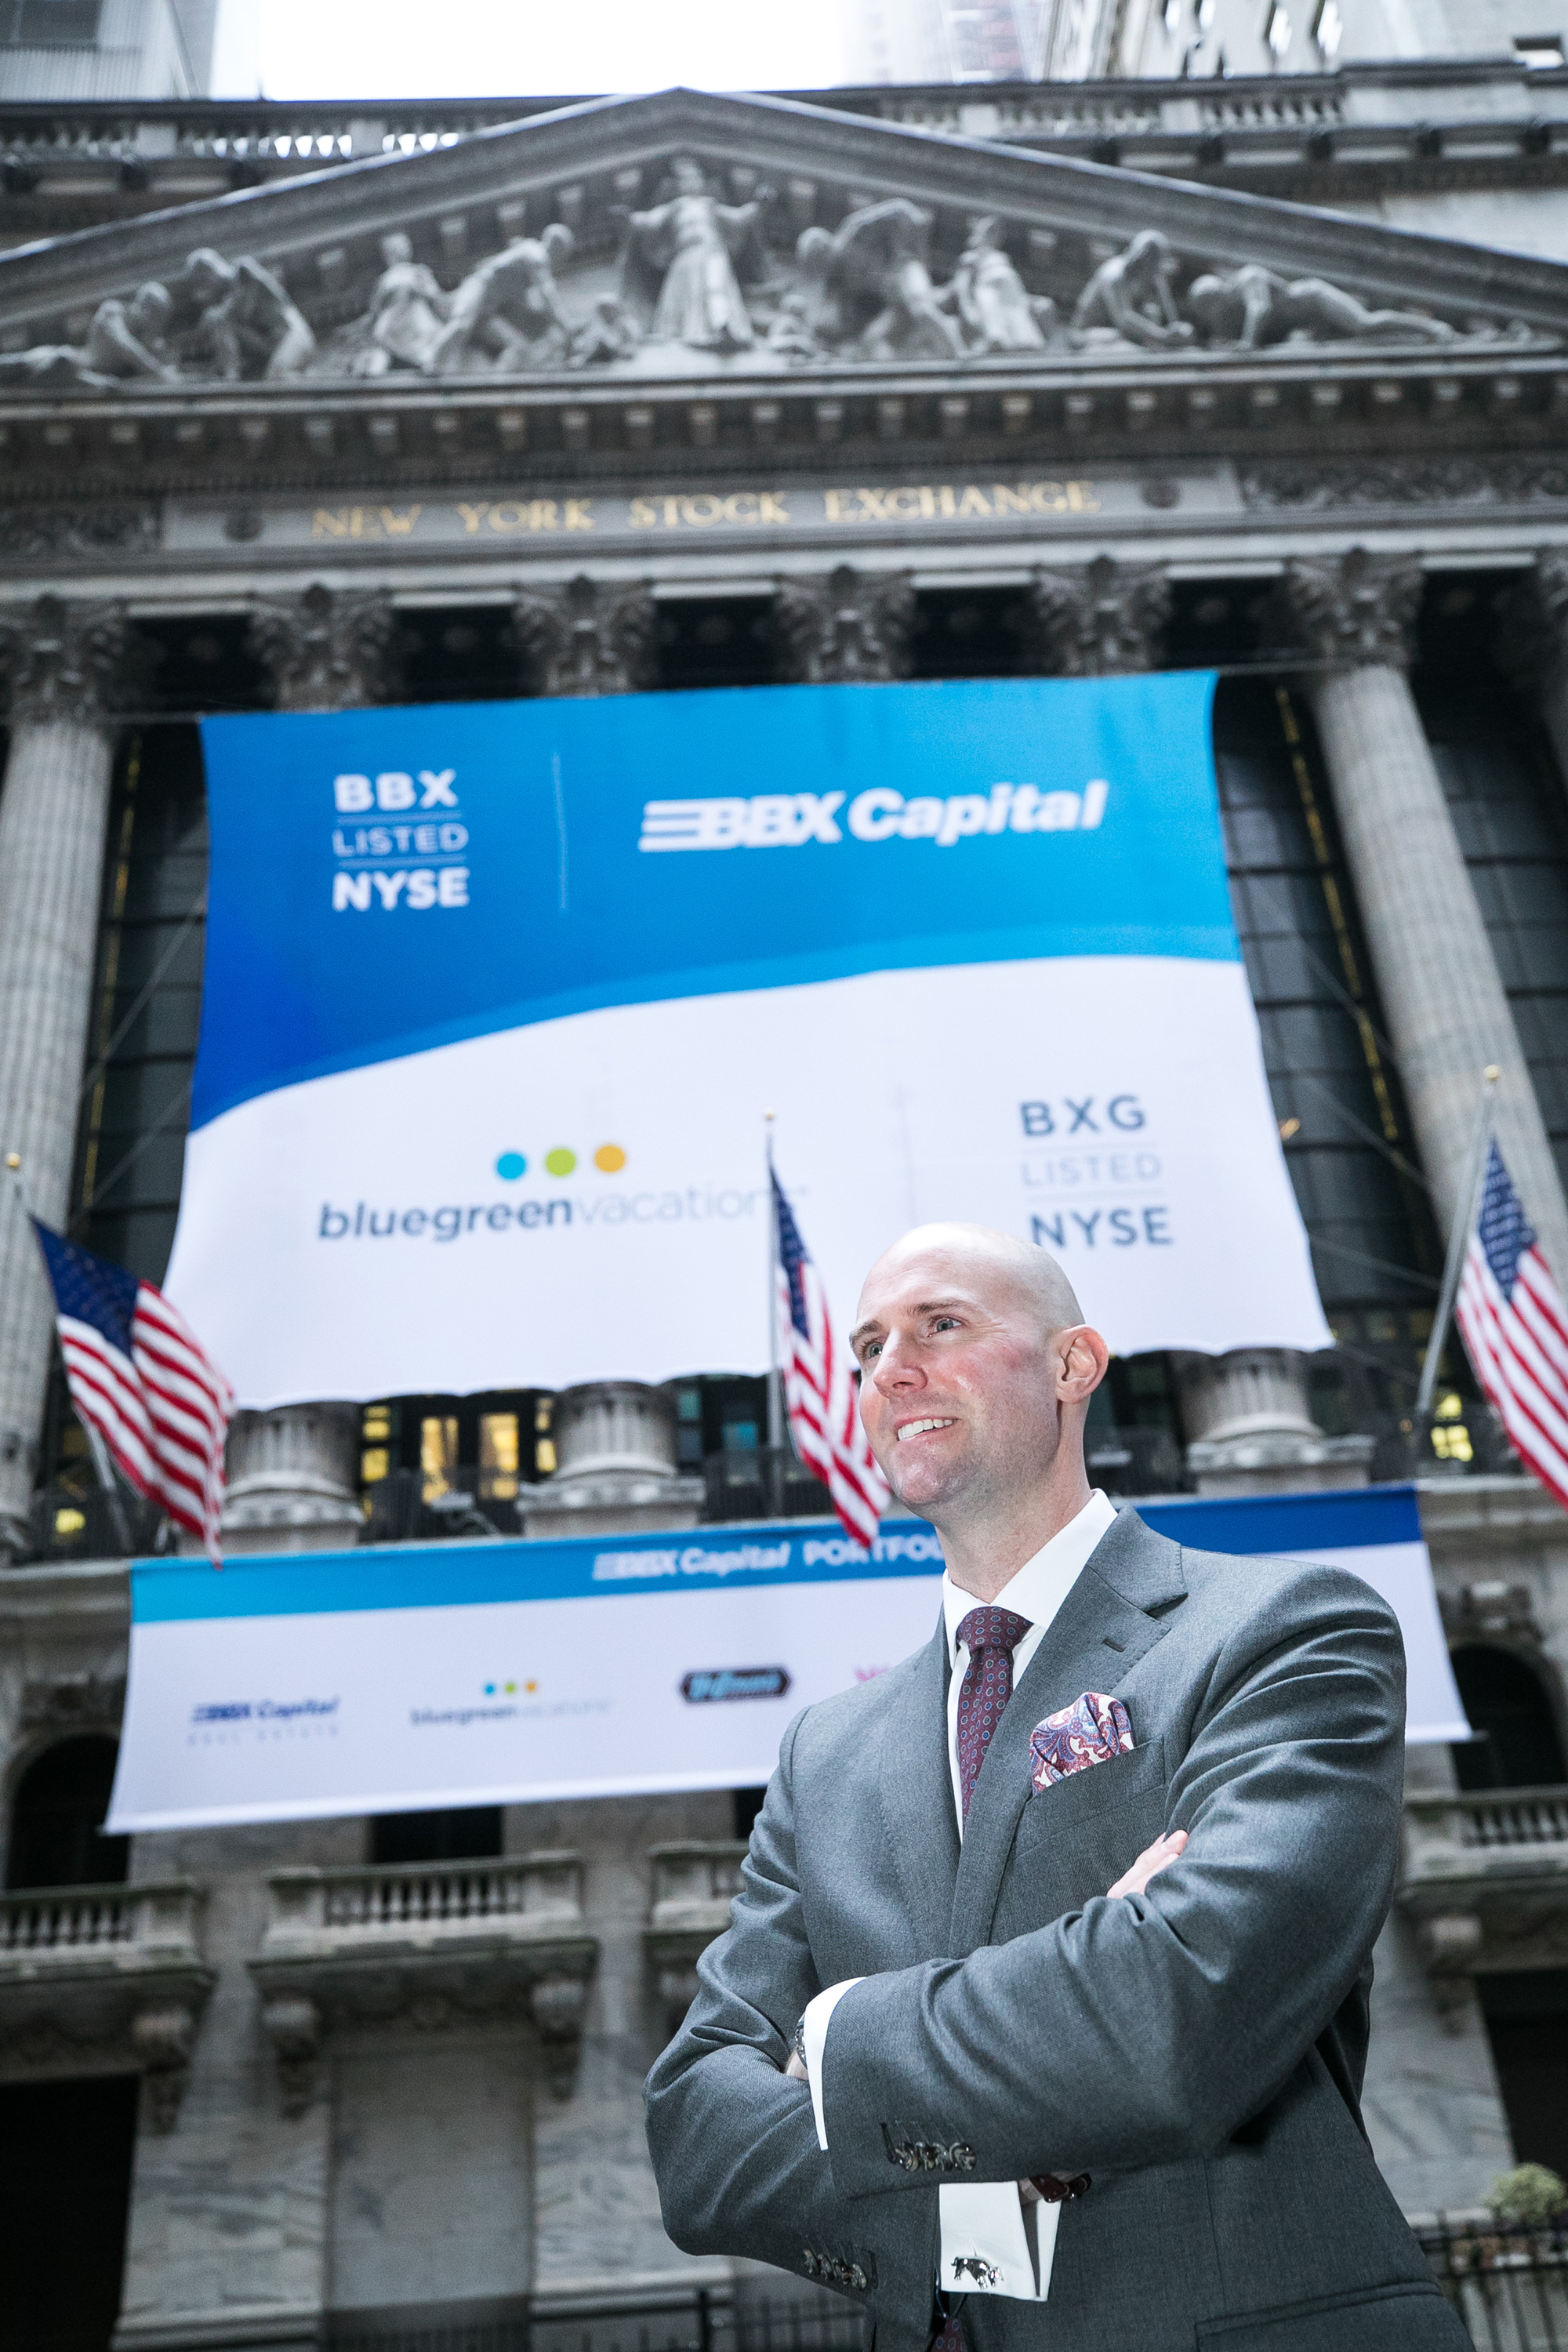 Pearson at the New York Stock Exchange in front of a banner for Bluegreen and parent BBX Capital